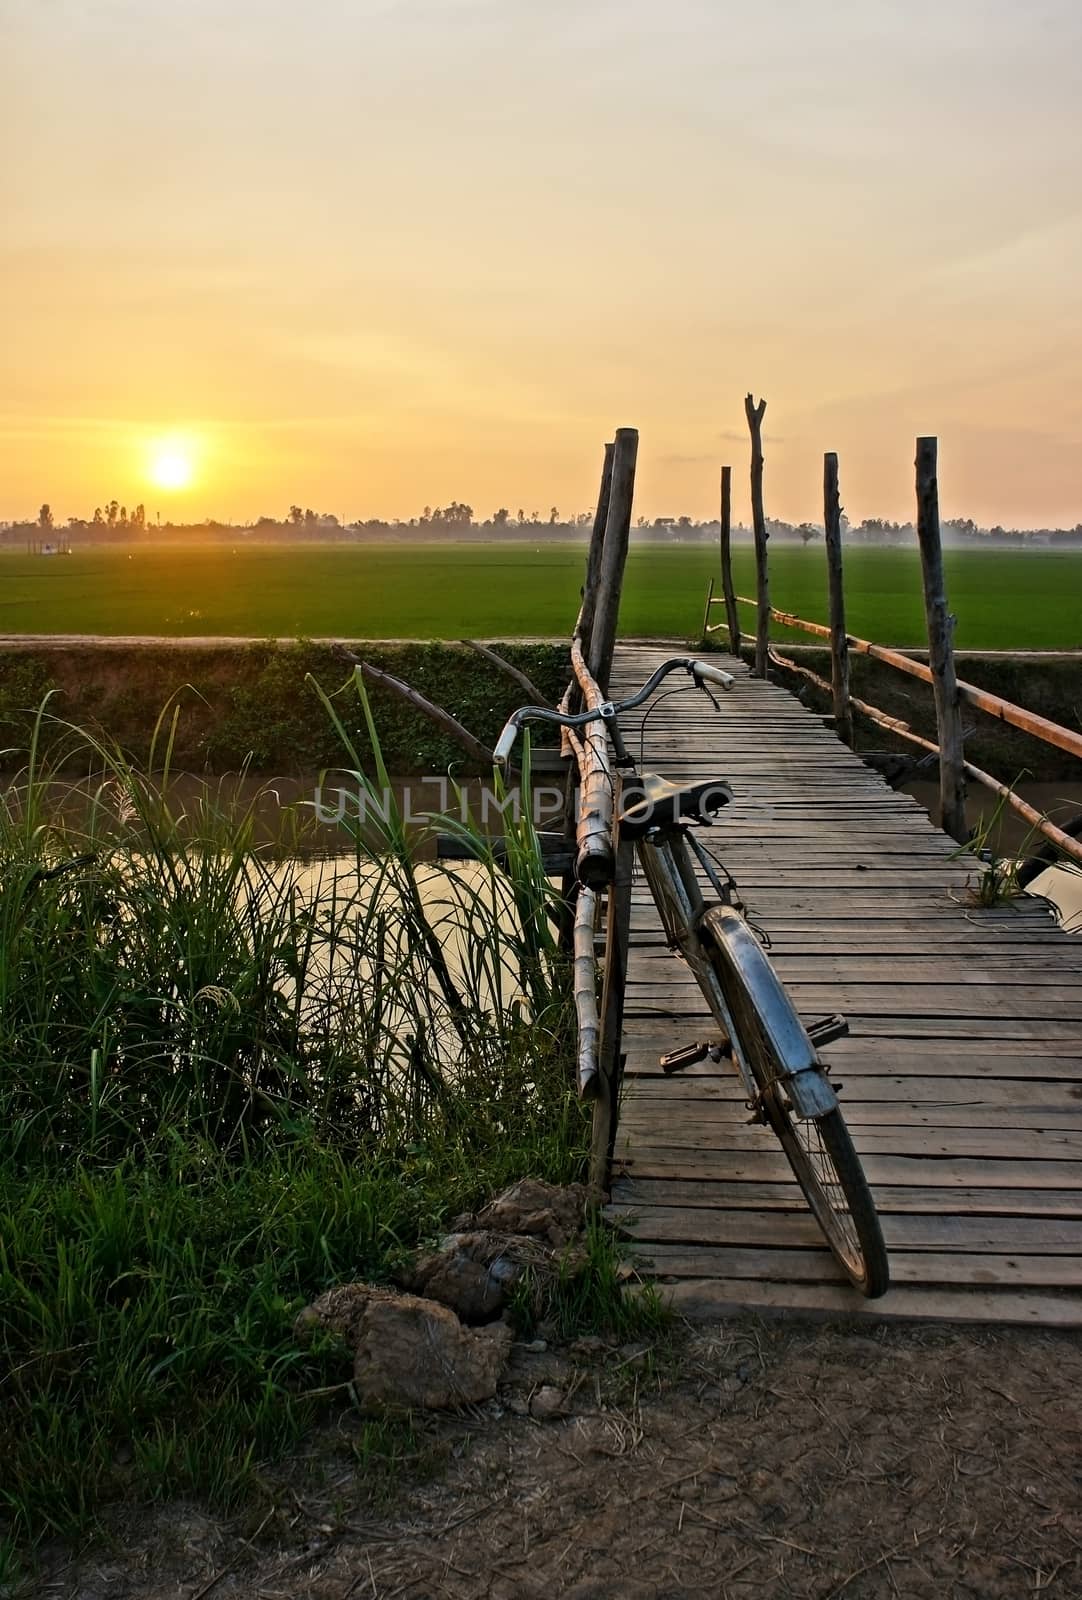 Beautiful landscape of nature with lovely orange sunset, bicycle put up on wooden fence, small wooden bridge across a river and in the distance is green rice field 